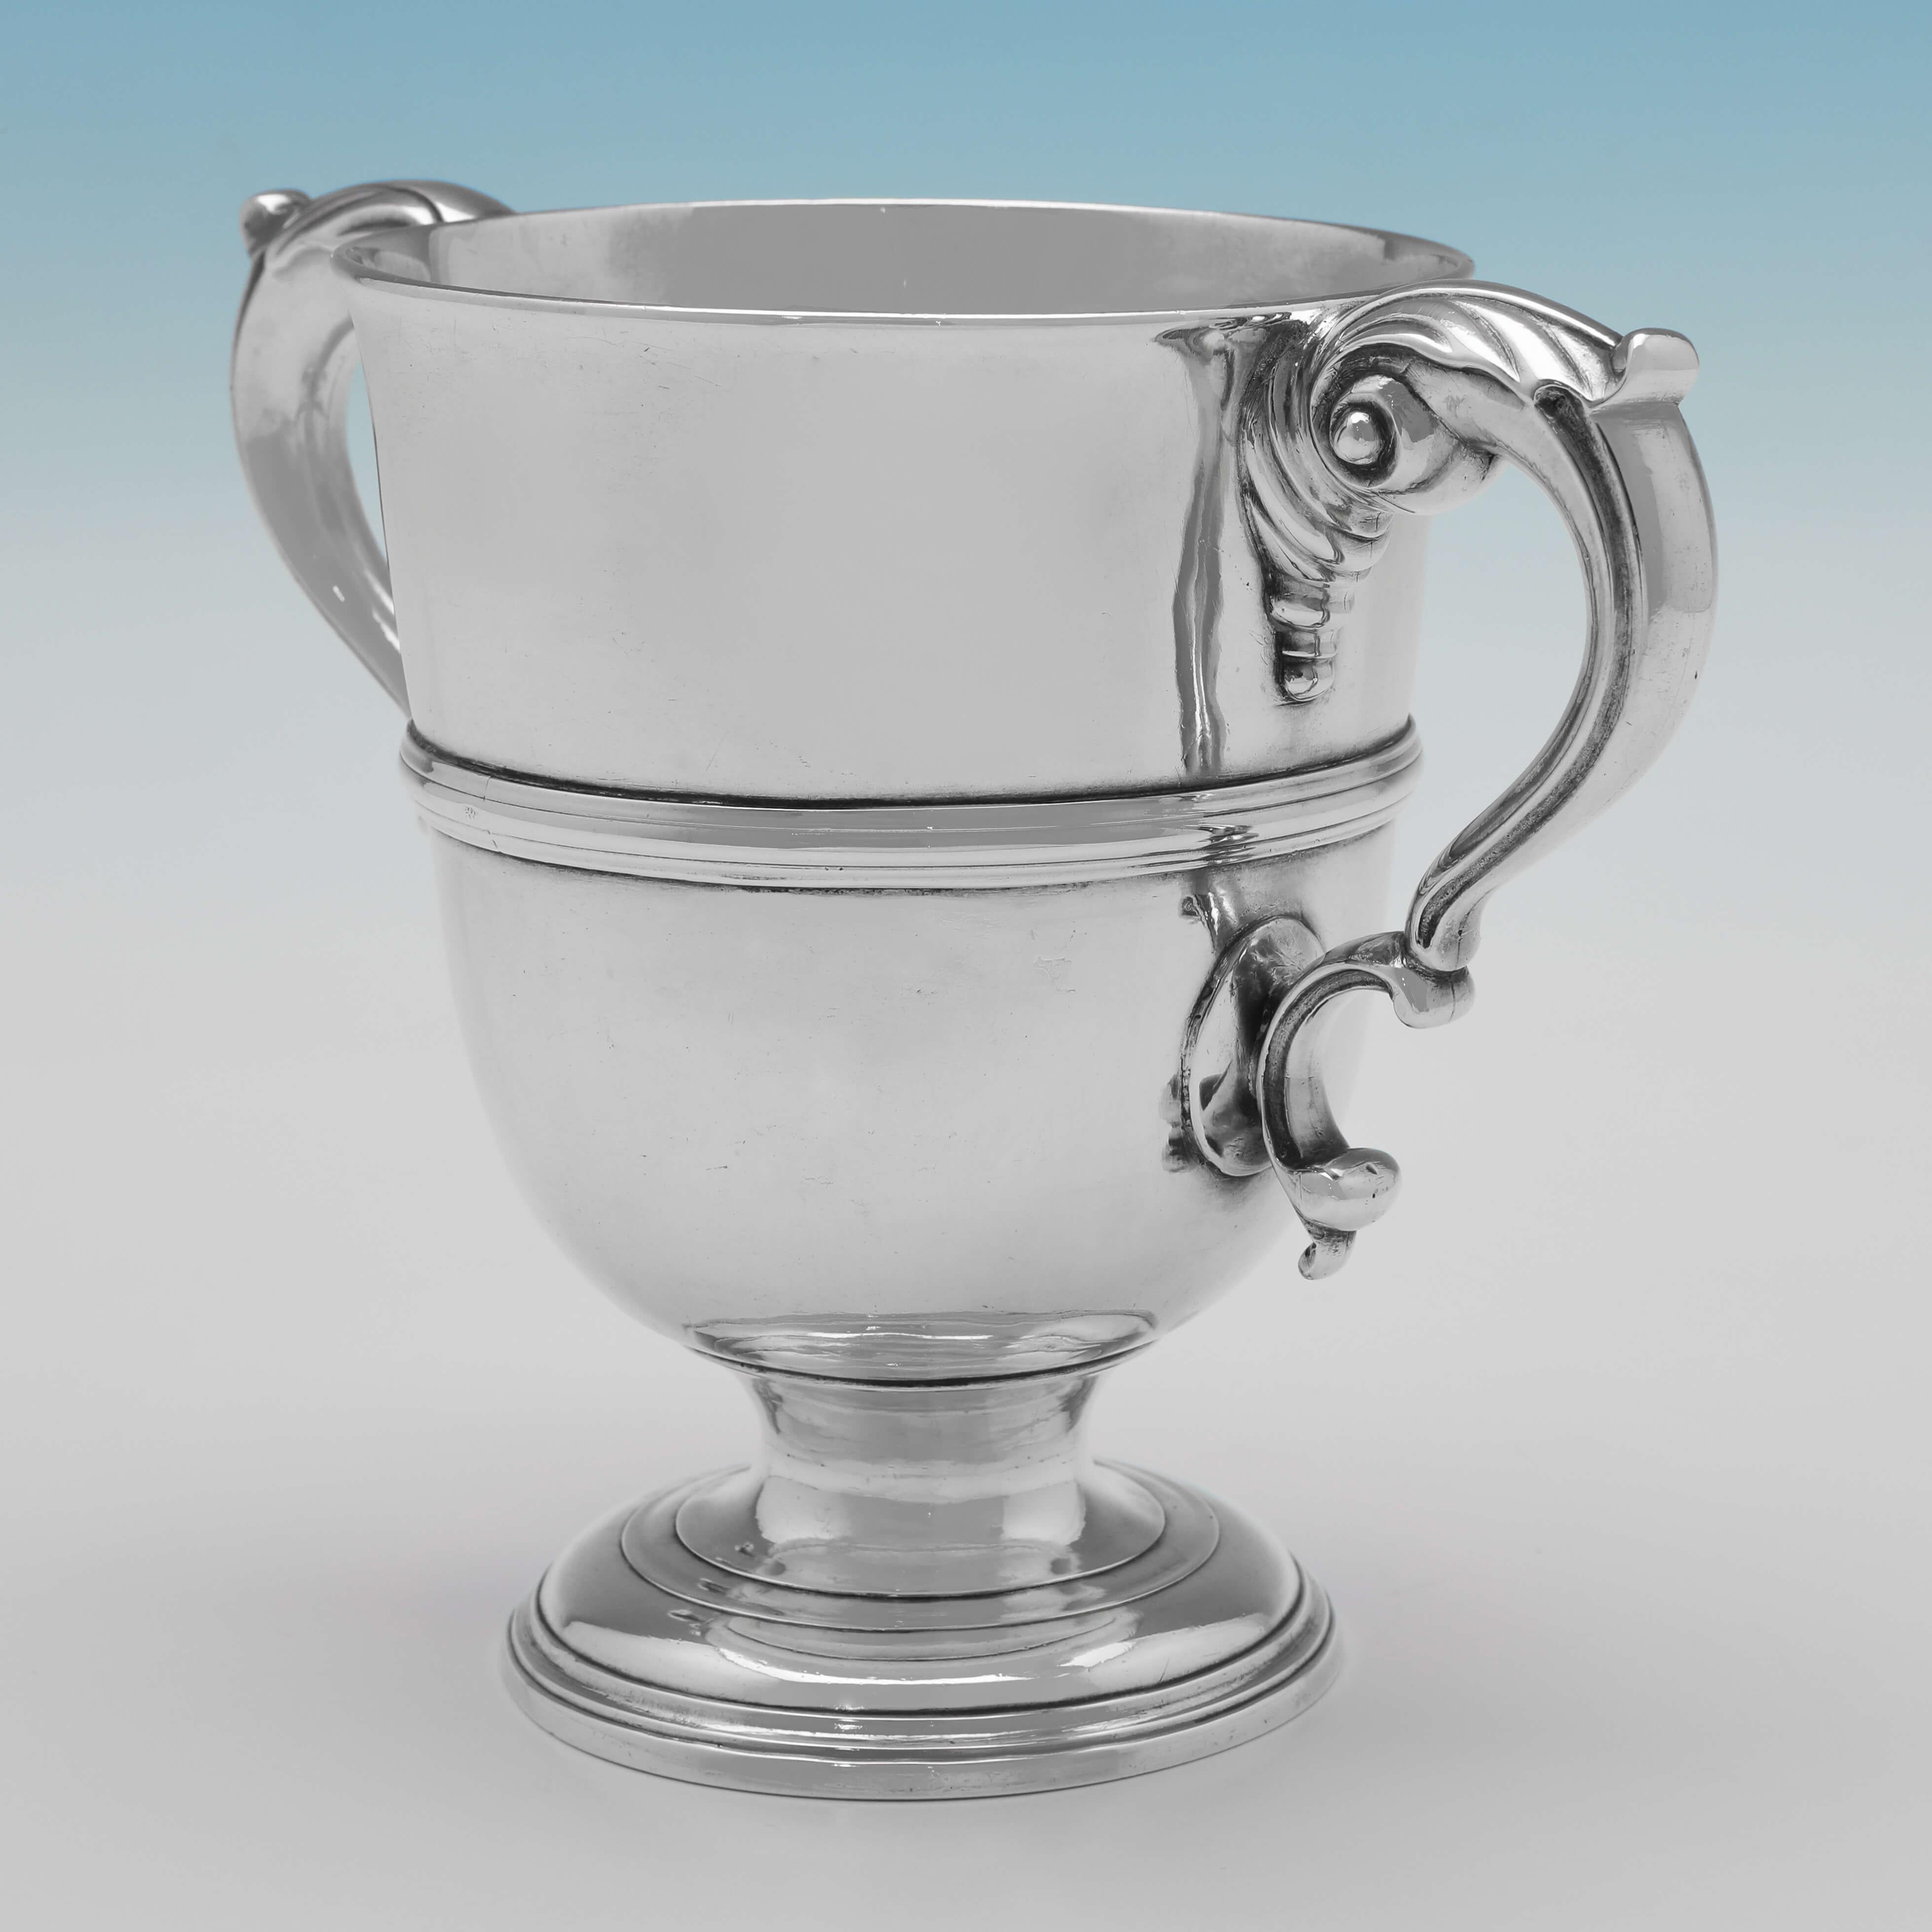 Made in Cork circa 1780 by Carden Terry, this handsome, George III period, Antique Sterling Silver Cup, is of traditional form, with acanthus detailed handles, and reed detailing. 

The cup measures 5